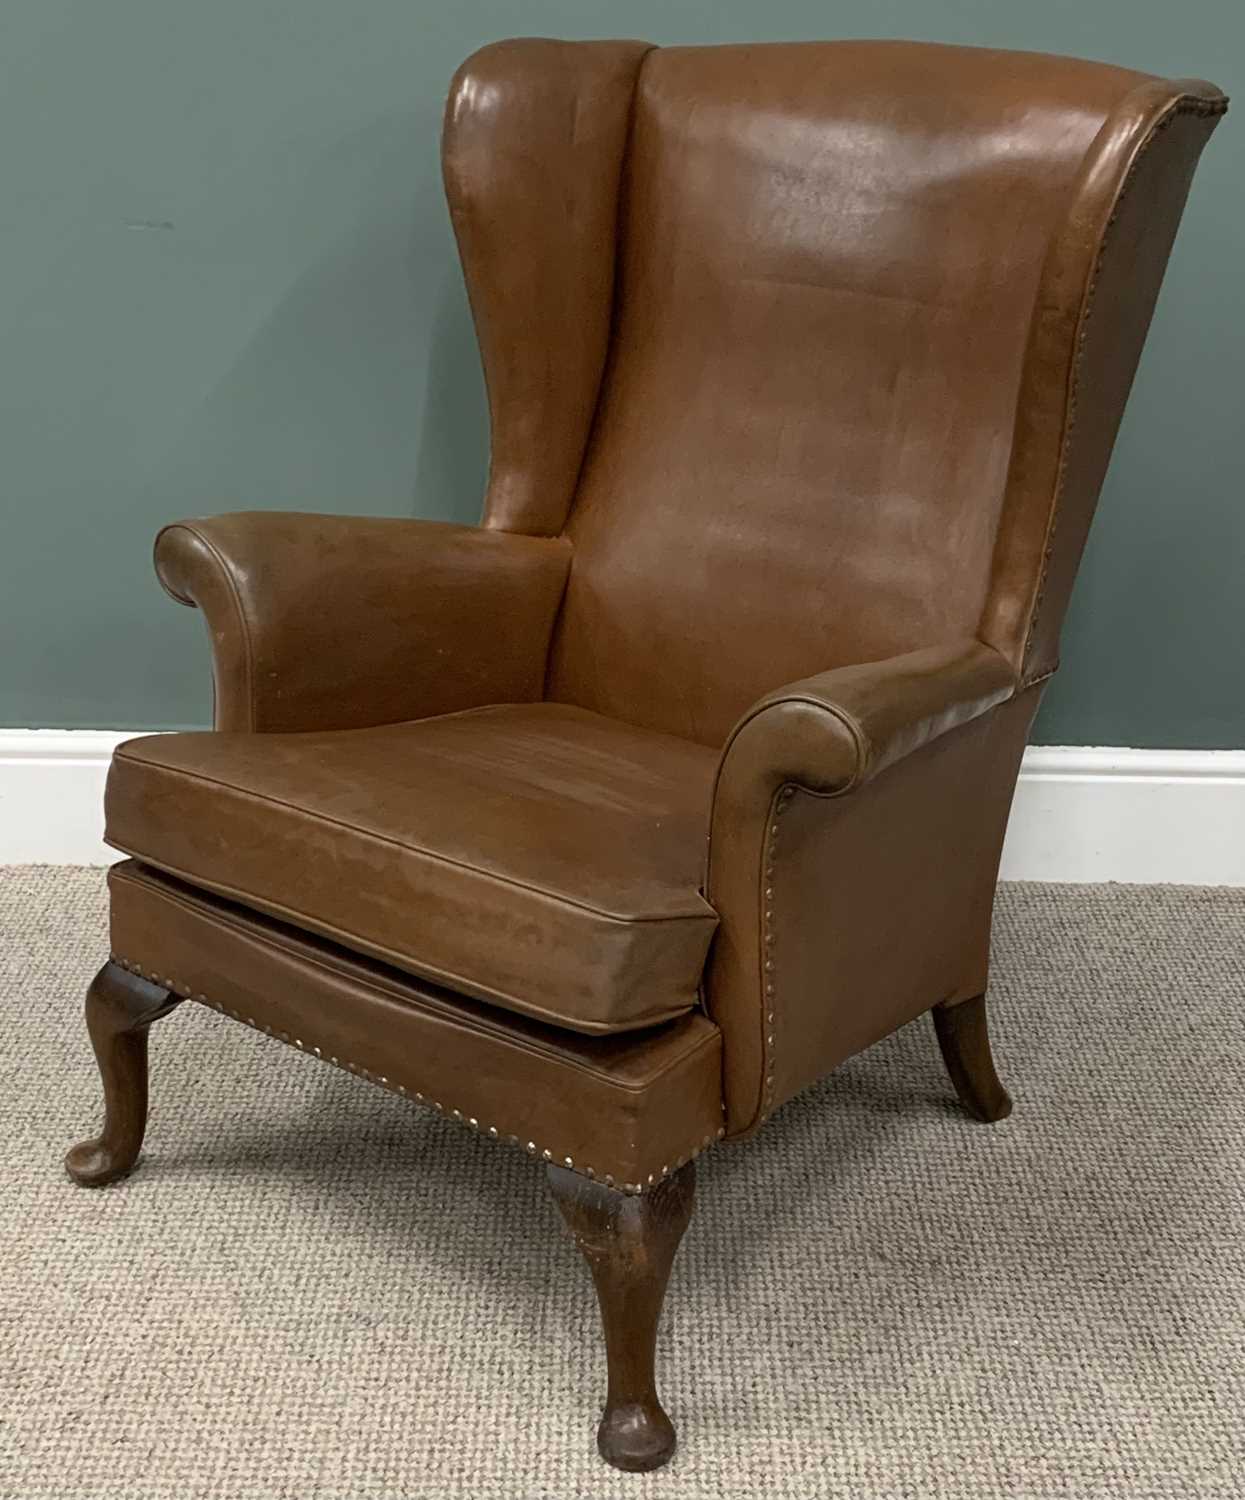 PARKER KNOLL WINGBACK ARMCHAIR in brown leather-effect, curled arm ends, metal button detail, - Image 2 of 5